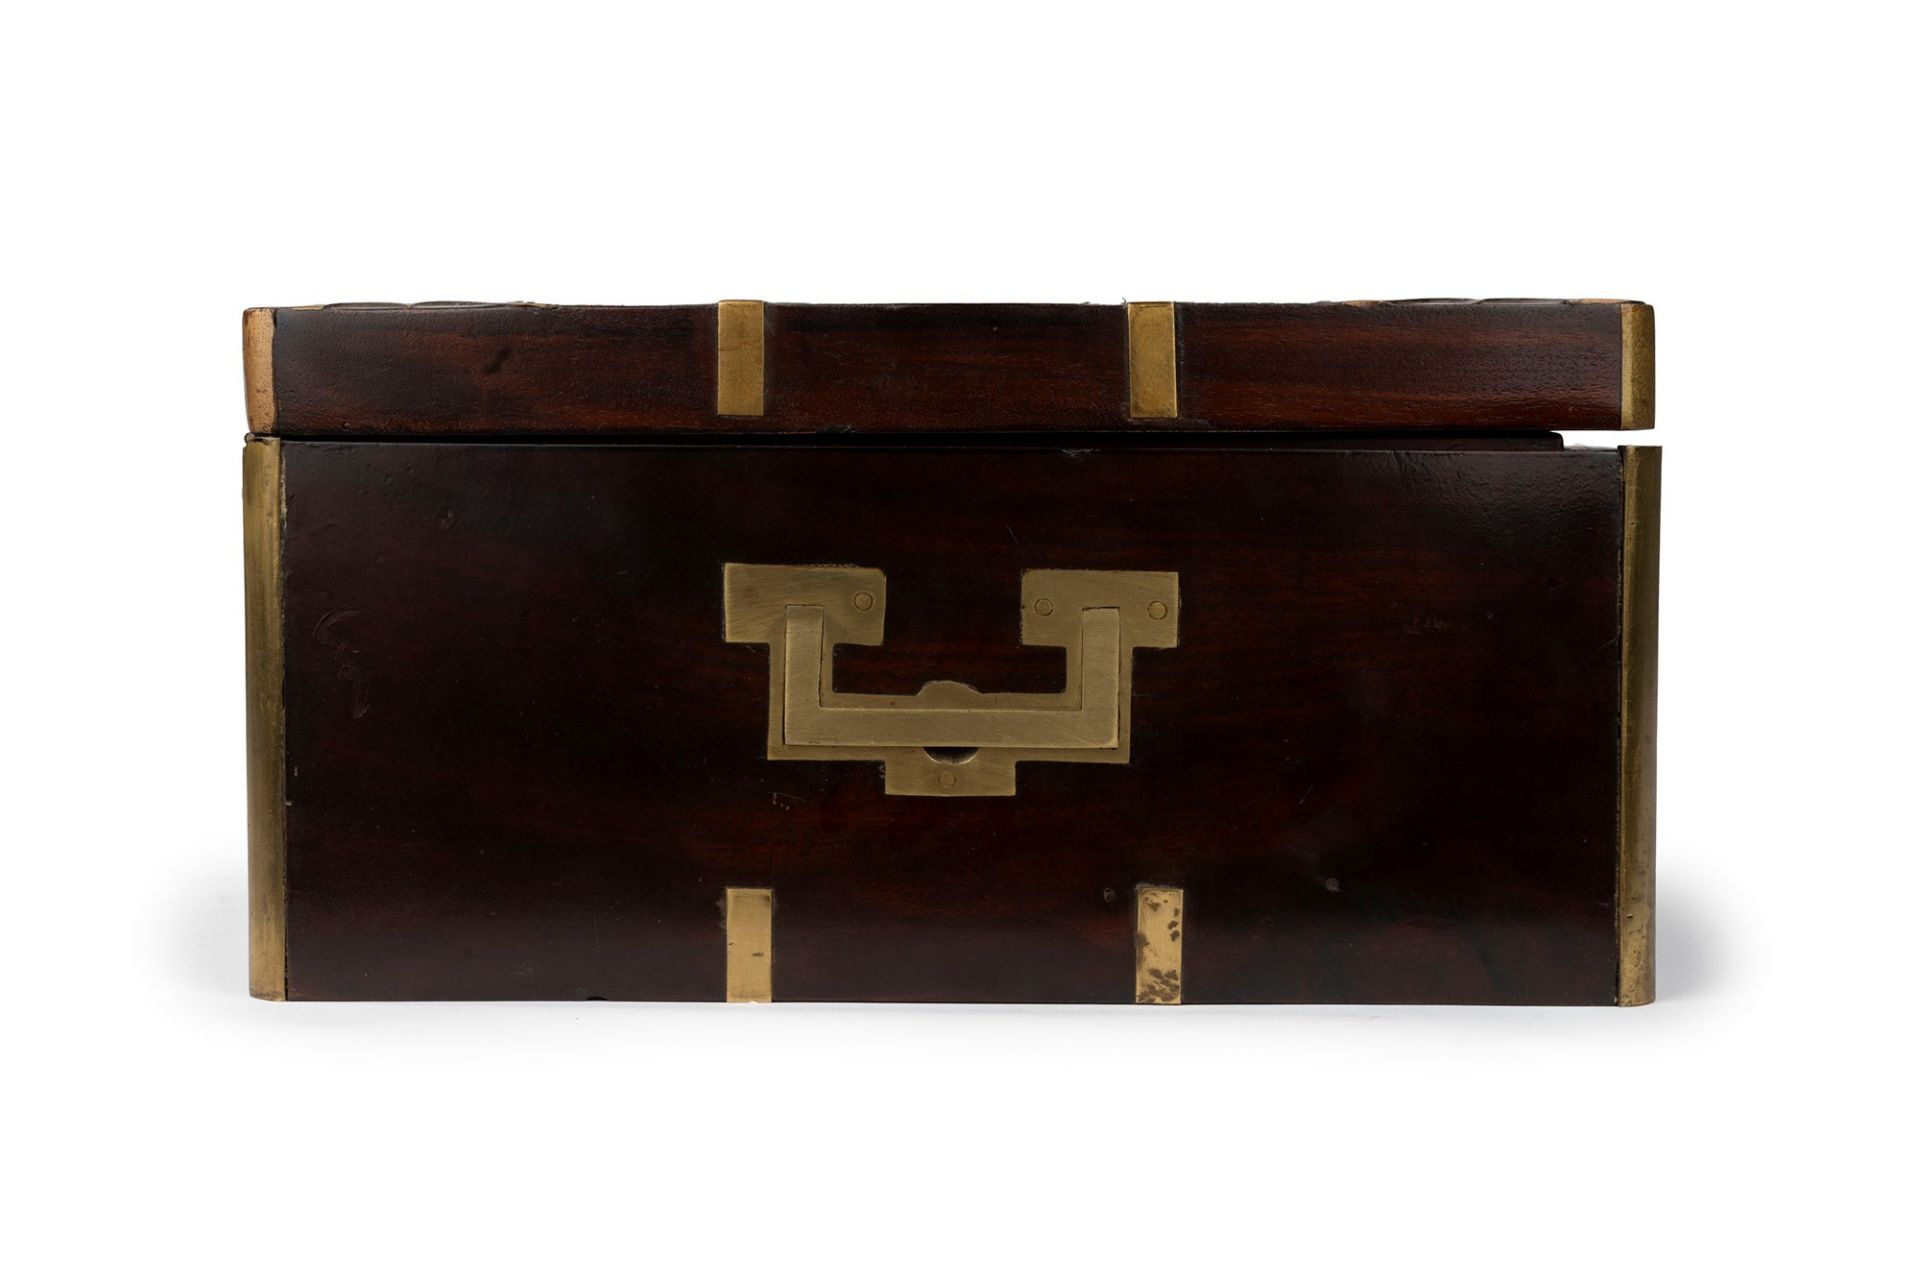 Mahogany and brass ship chest, 19th century - Image 3 of 5